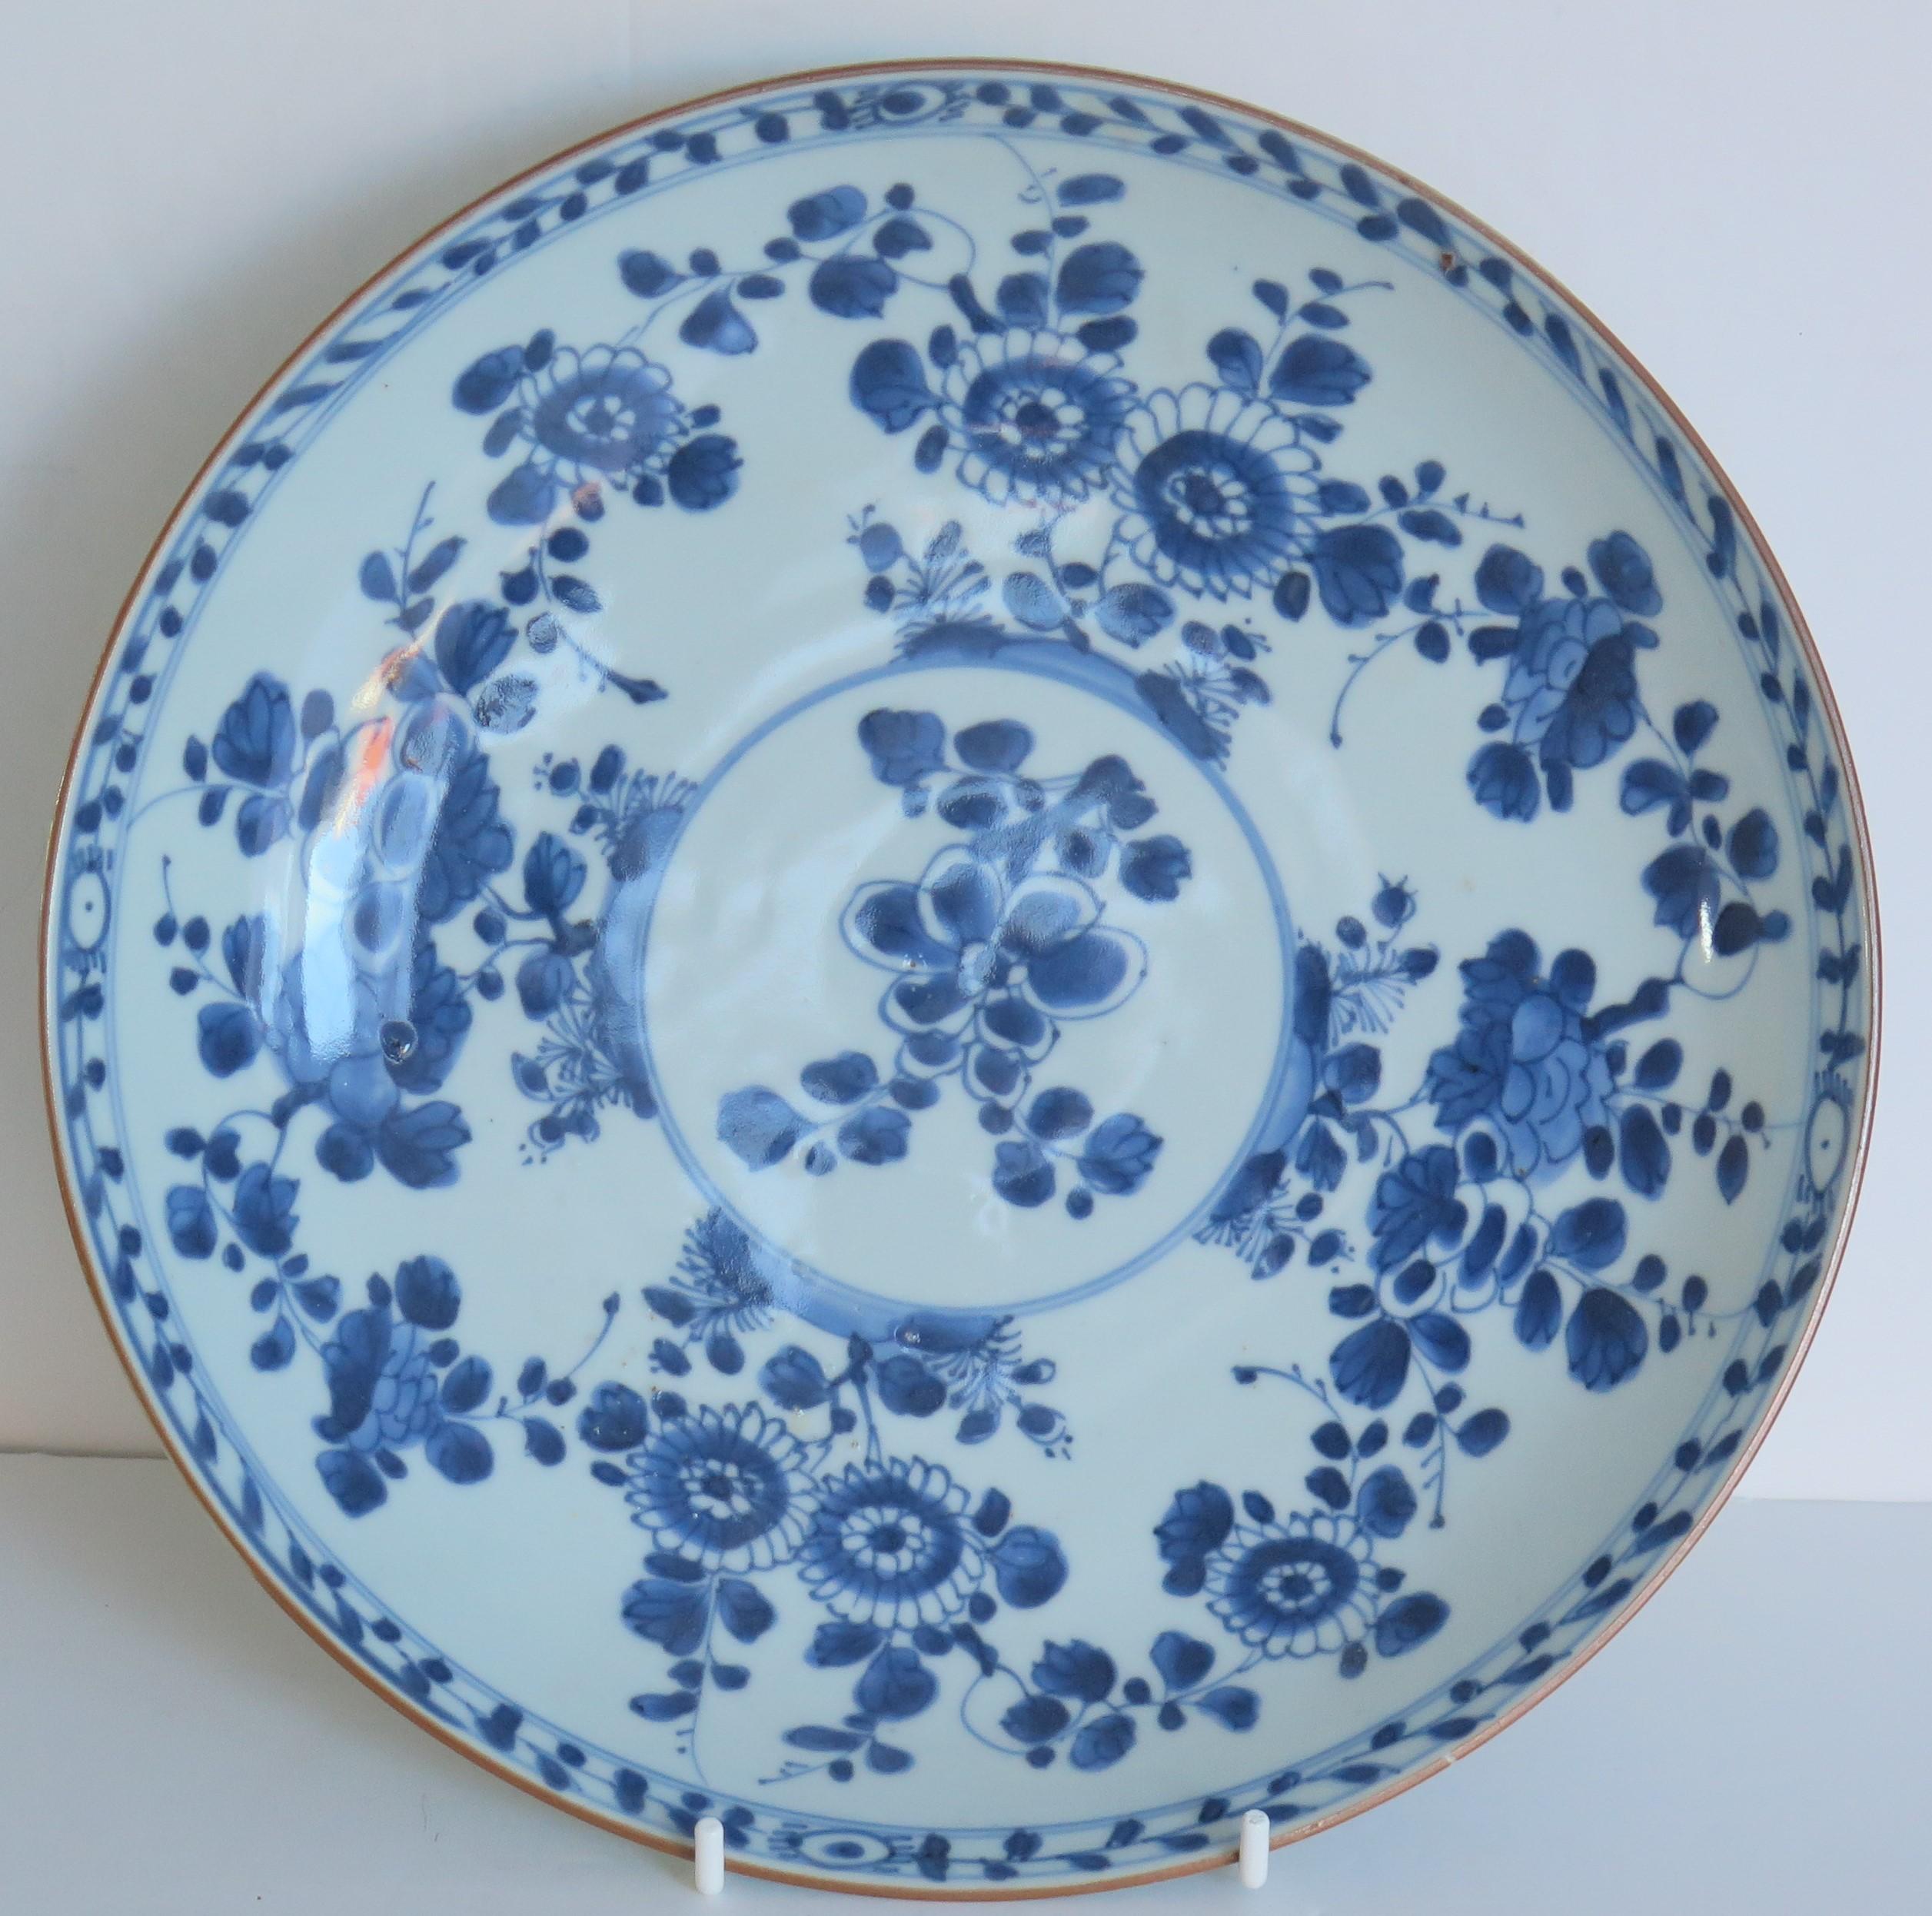 This is a beautiful hand painted blue and white Chinese porcelain large diameter deep plate or charger, dating to the first half of the 18th century, circa 1720, Qing dynasty, either late Kangxi or Yongzheng period.

The plate is well potted and has